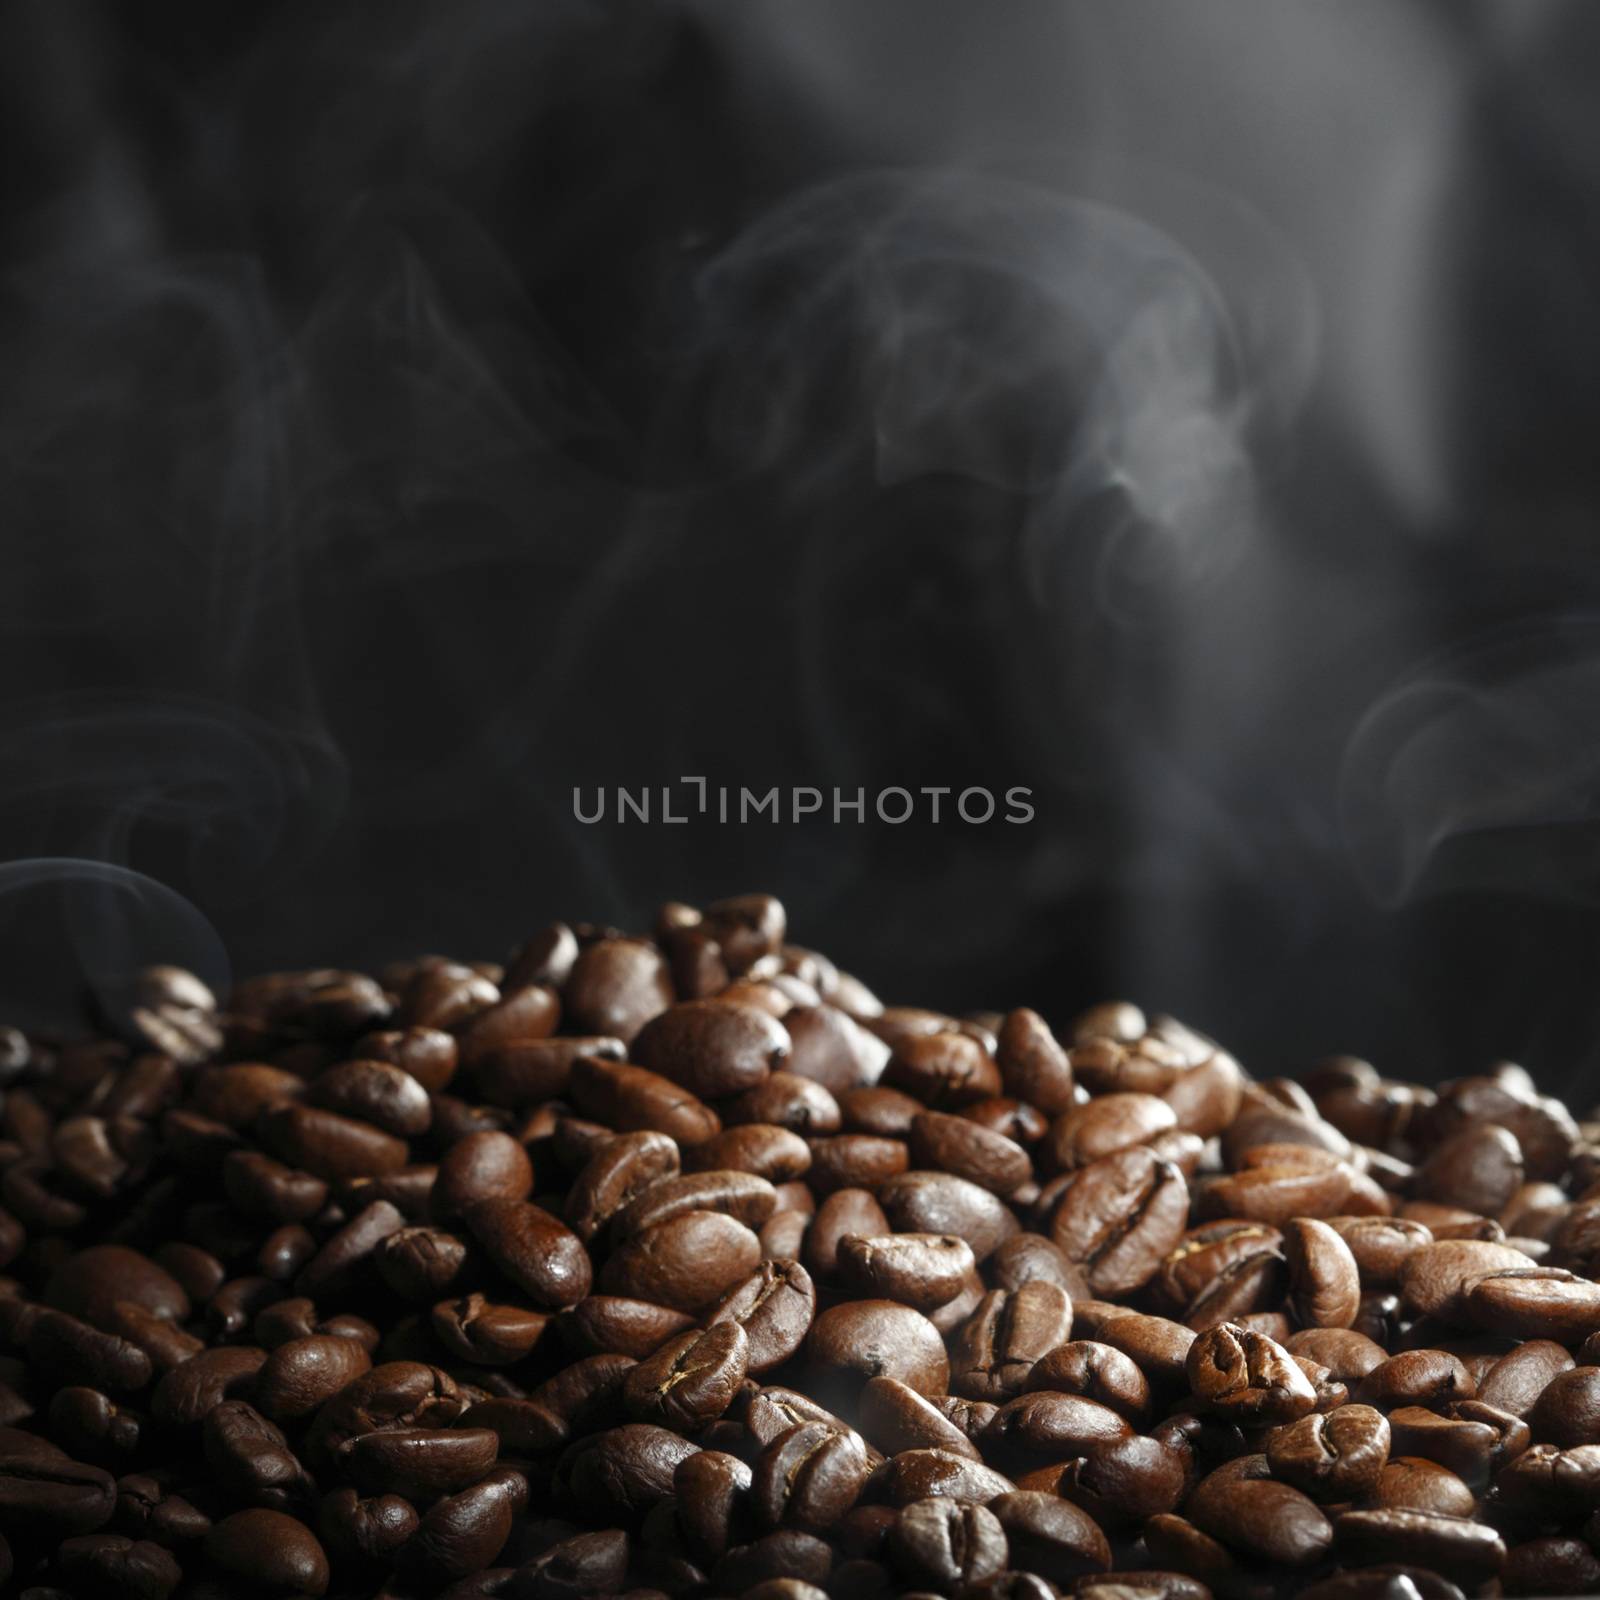 Hot roasted coffee beans and steam on black